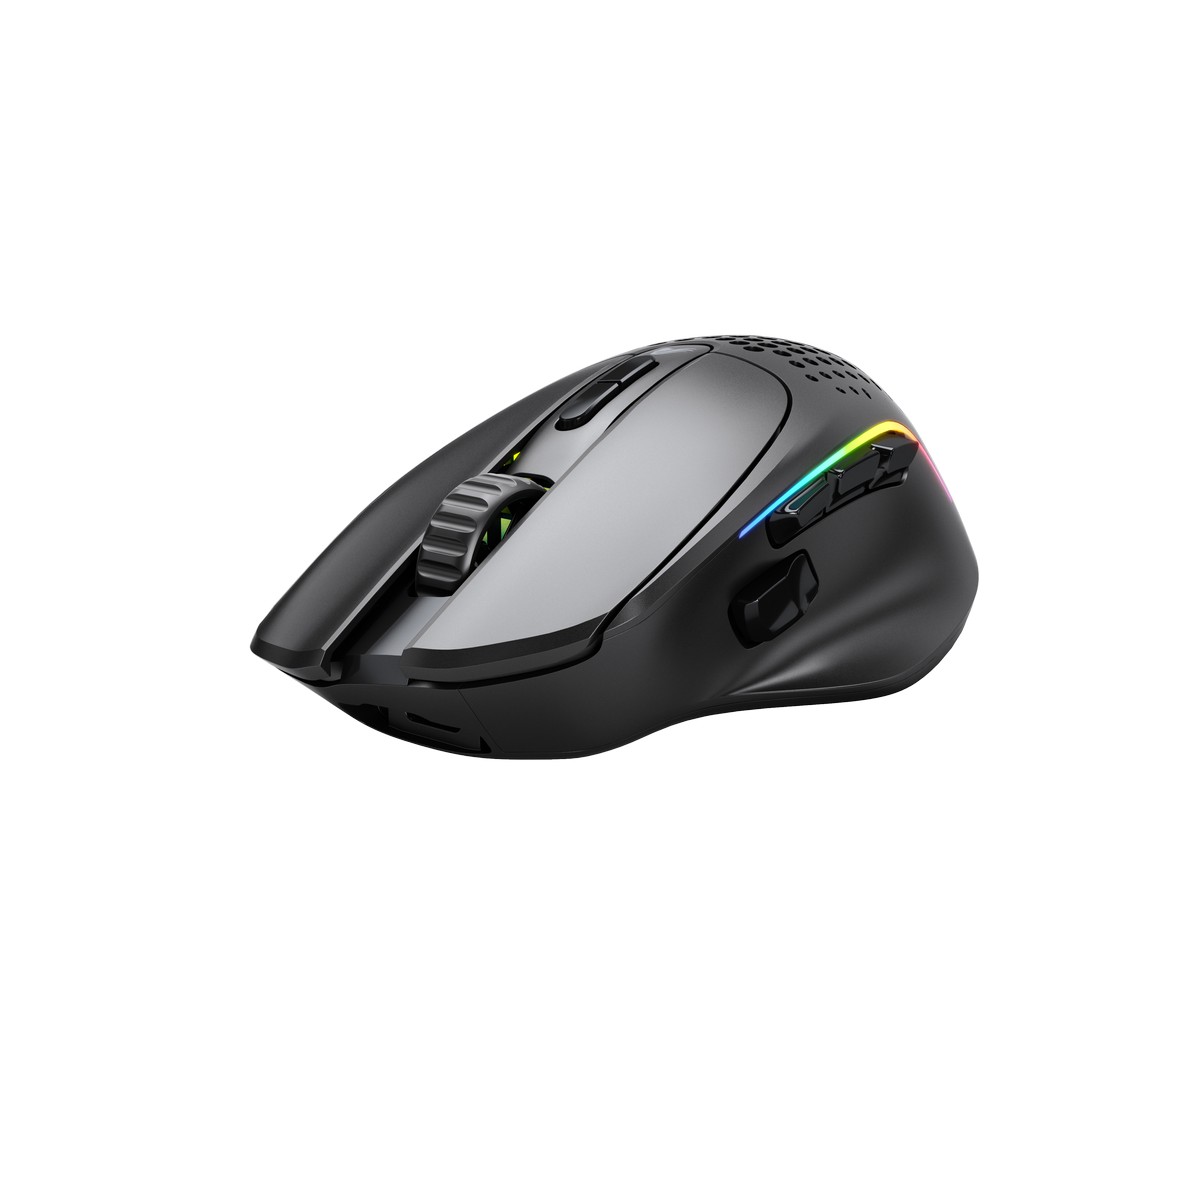 Glorious - Glorious Model I 2 Wireless RGB Optical Gaming Mouse - Matte Black (GLO-MS-IWV2-MB)